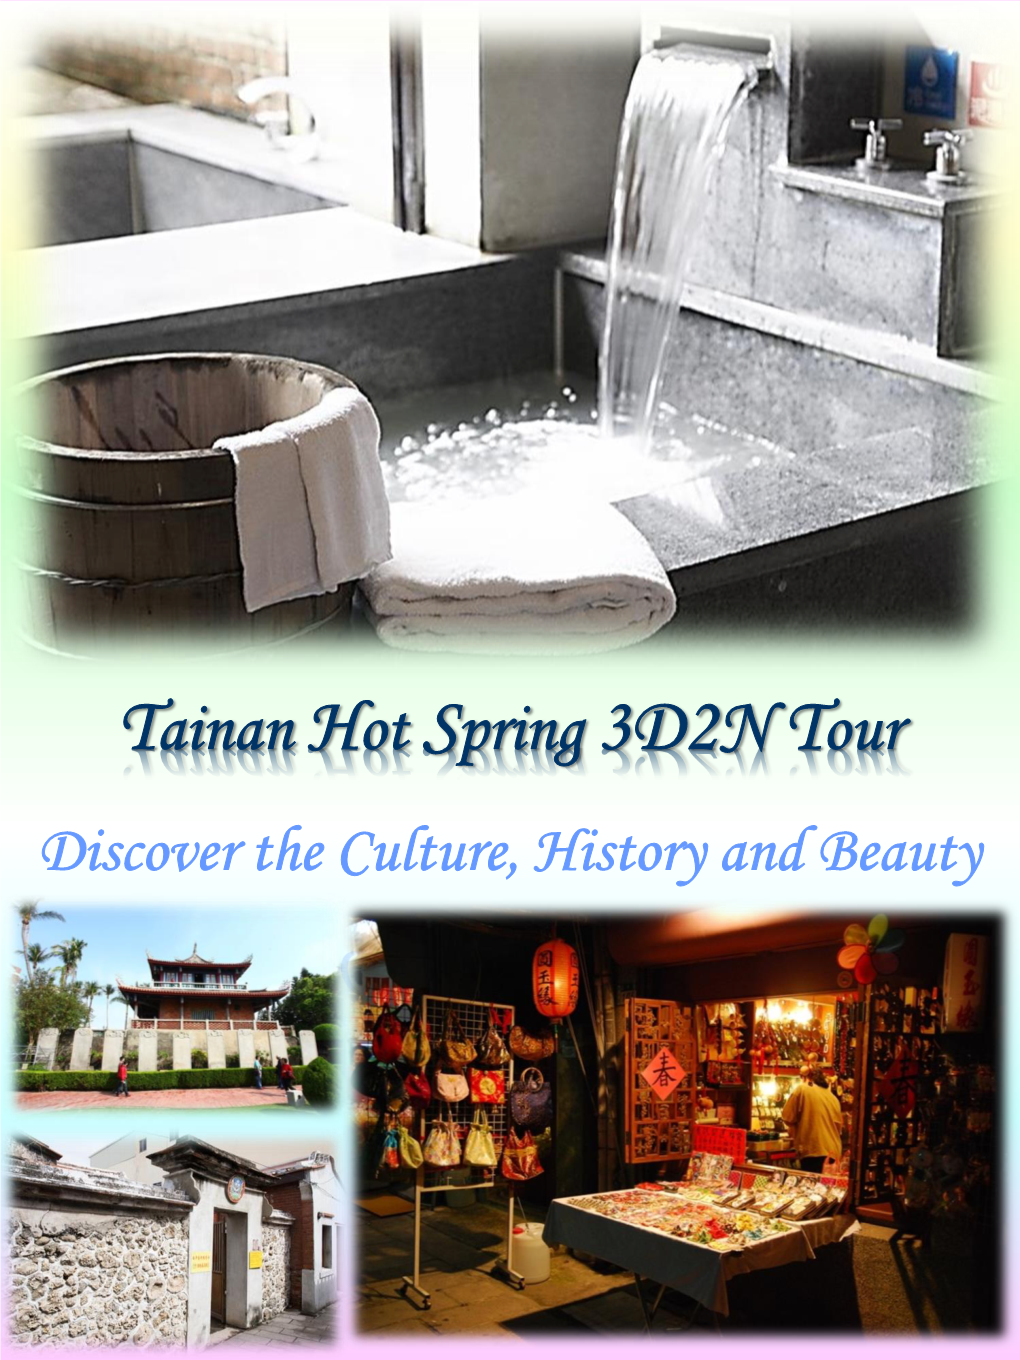 Tainan Hot Spring 3D2N Tour Discover the Culture, History and Beauty Overview Tainan Is the City in the Southern Taiwan with a Long History That Never Fades